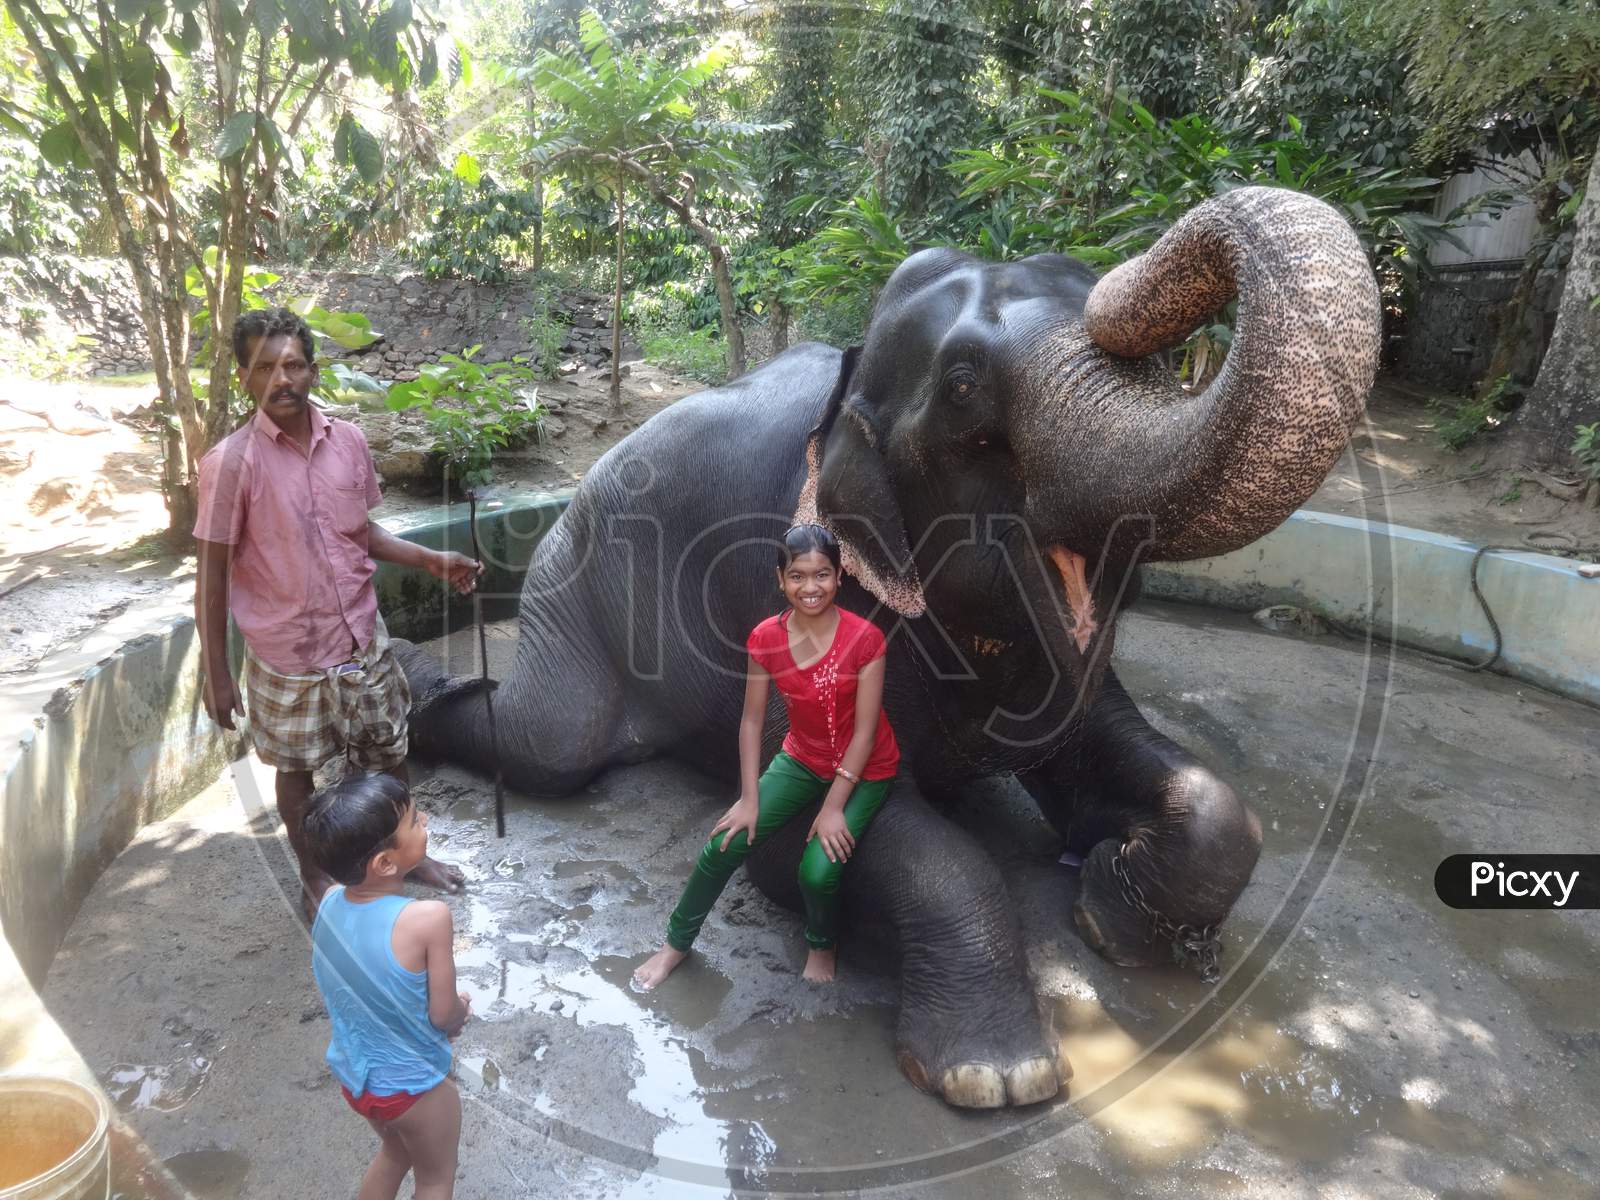 kids bathing and posing with an elephant